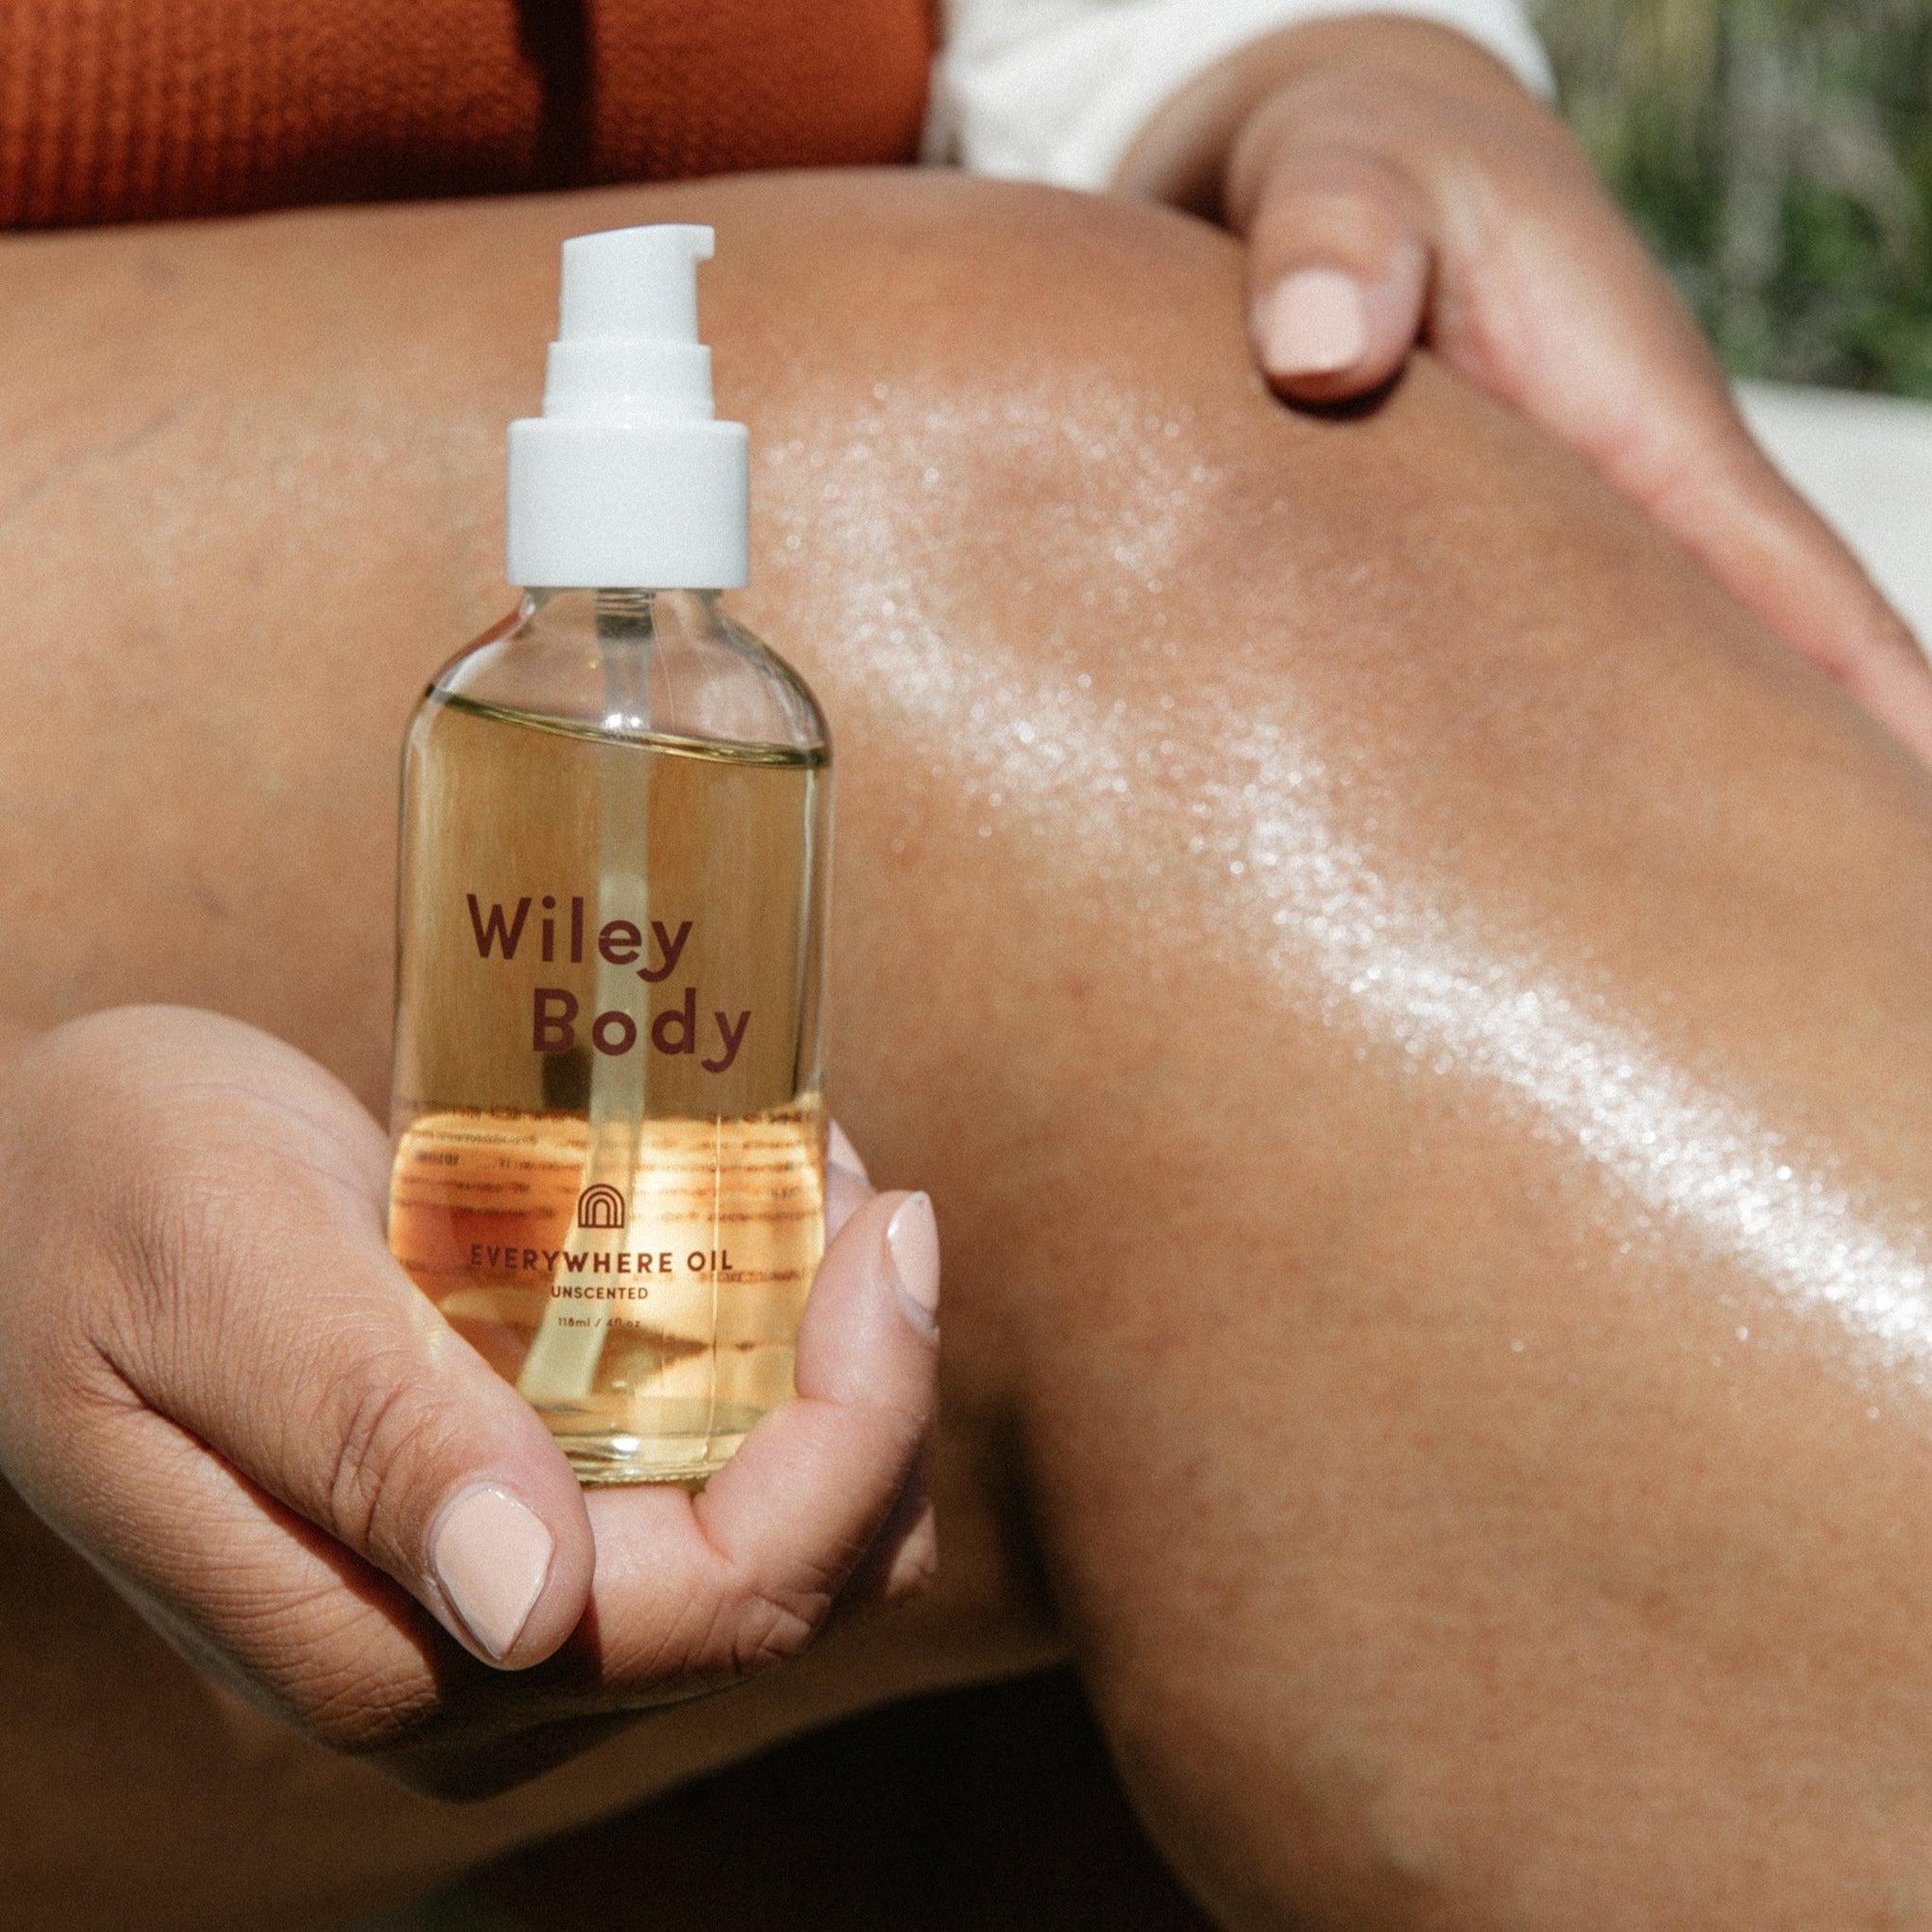 An organic aloe vera hand and body wash bundled with Wiley Body bundle, held by a woman.